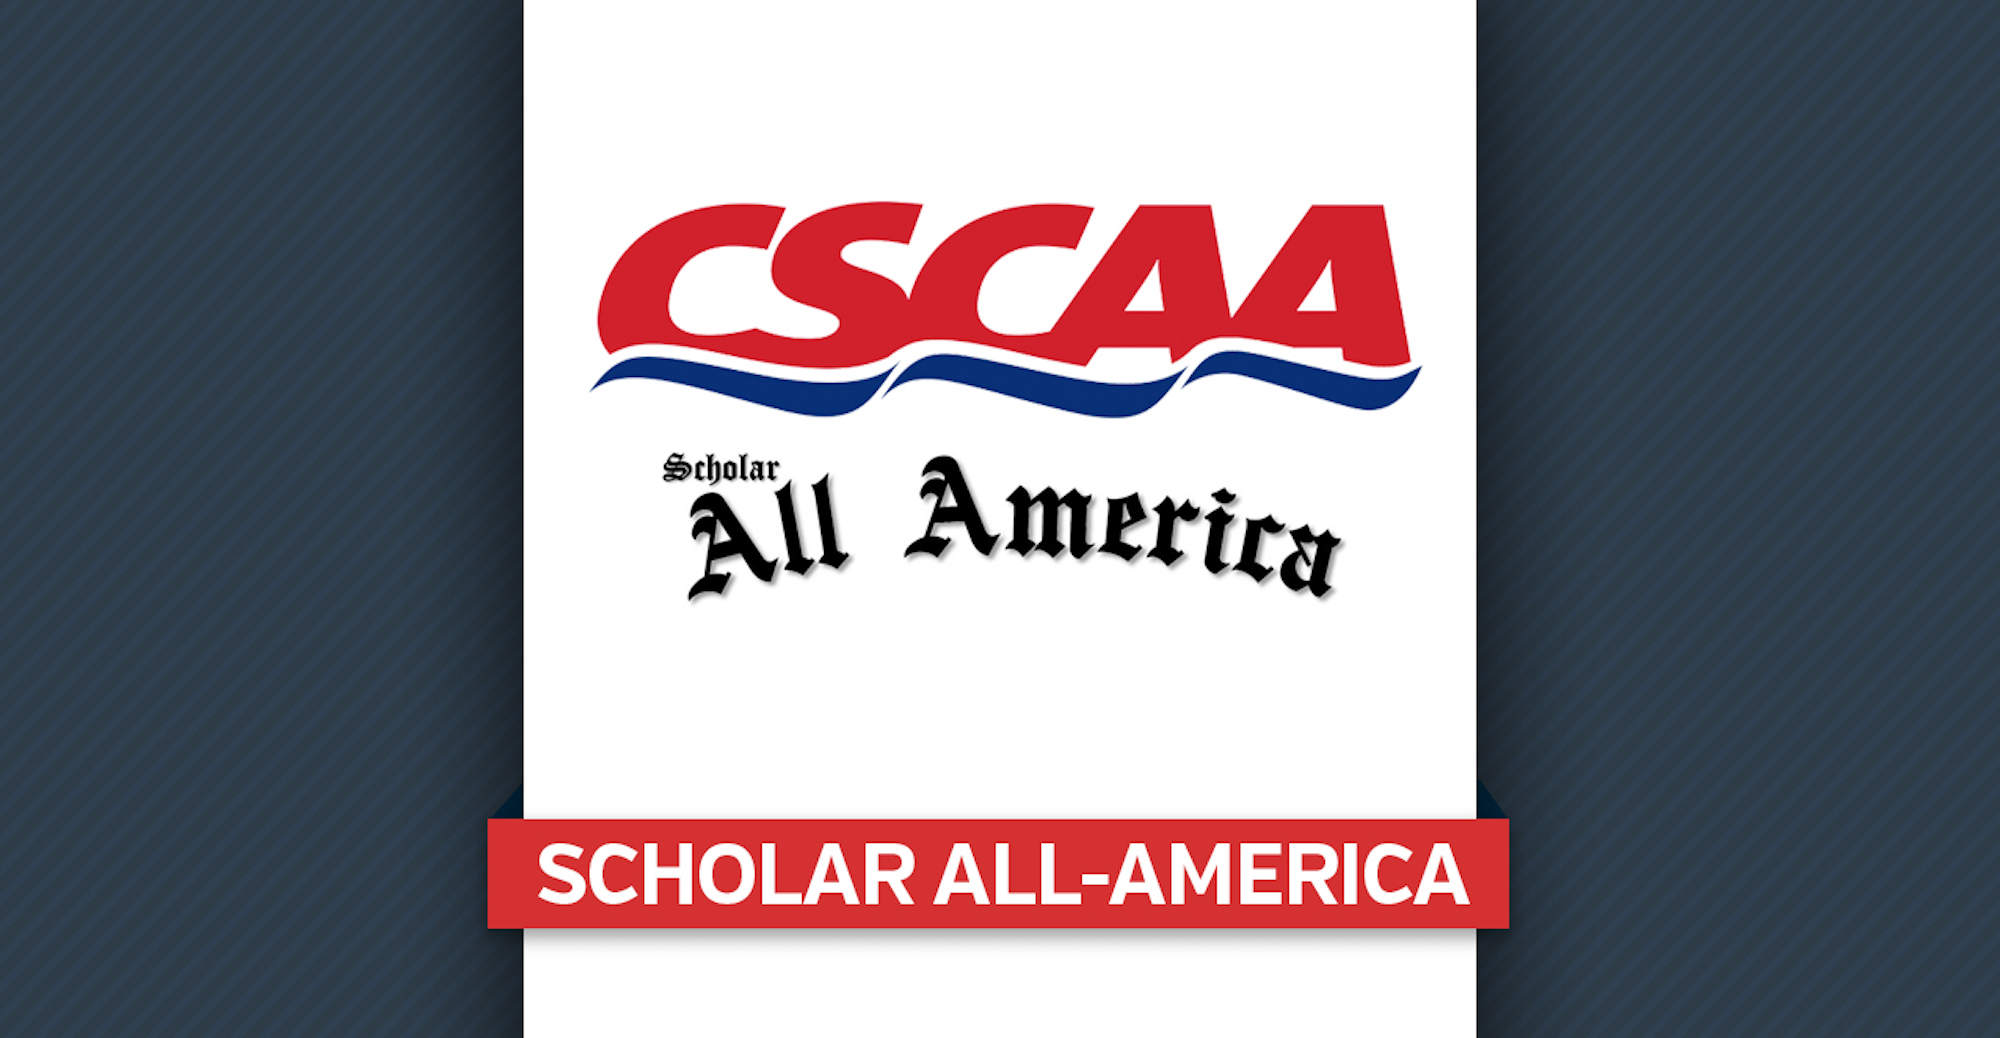 'Roo Women's Swimming Earns CSCAA Scholar All-America Honors